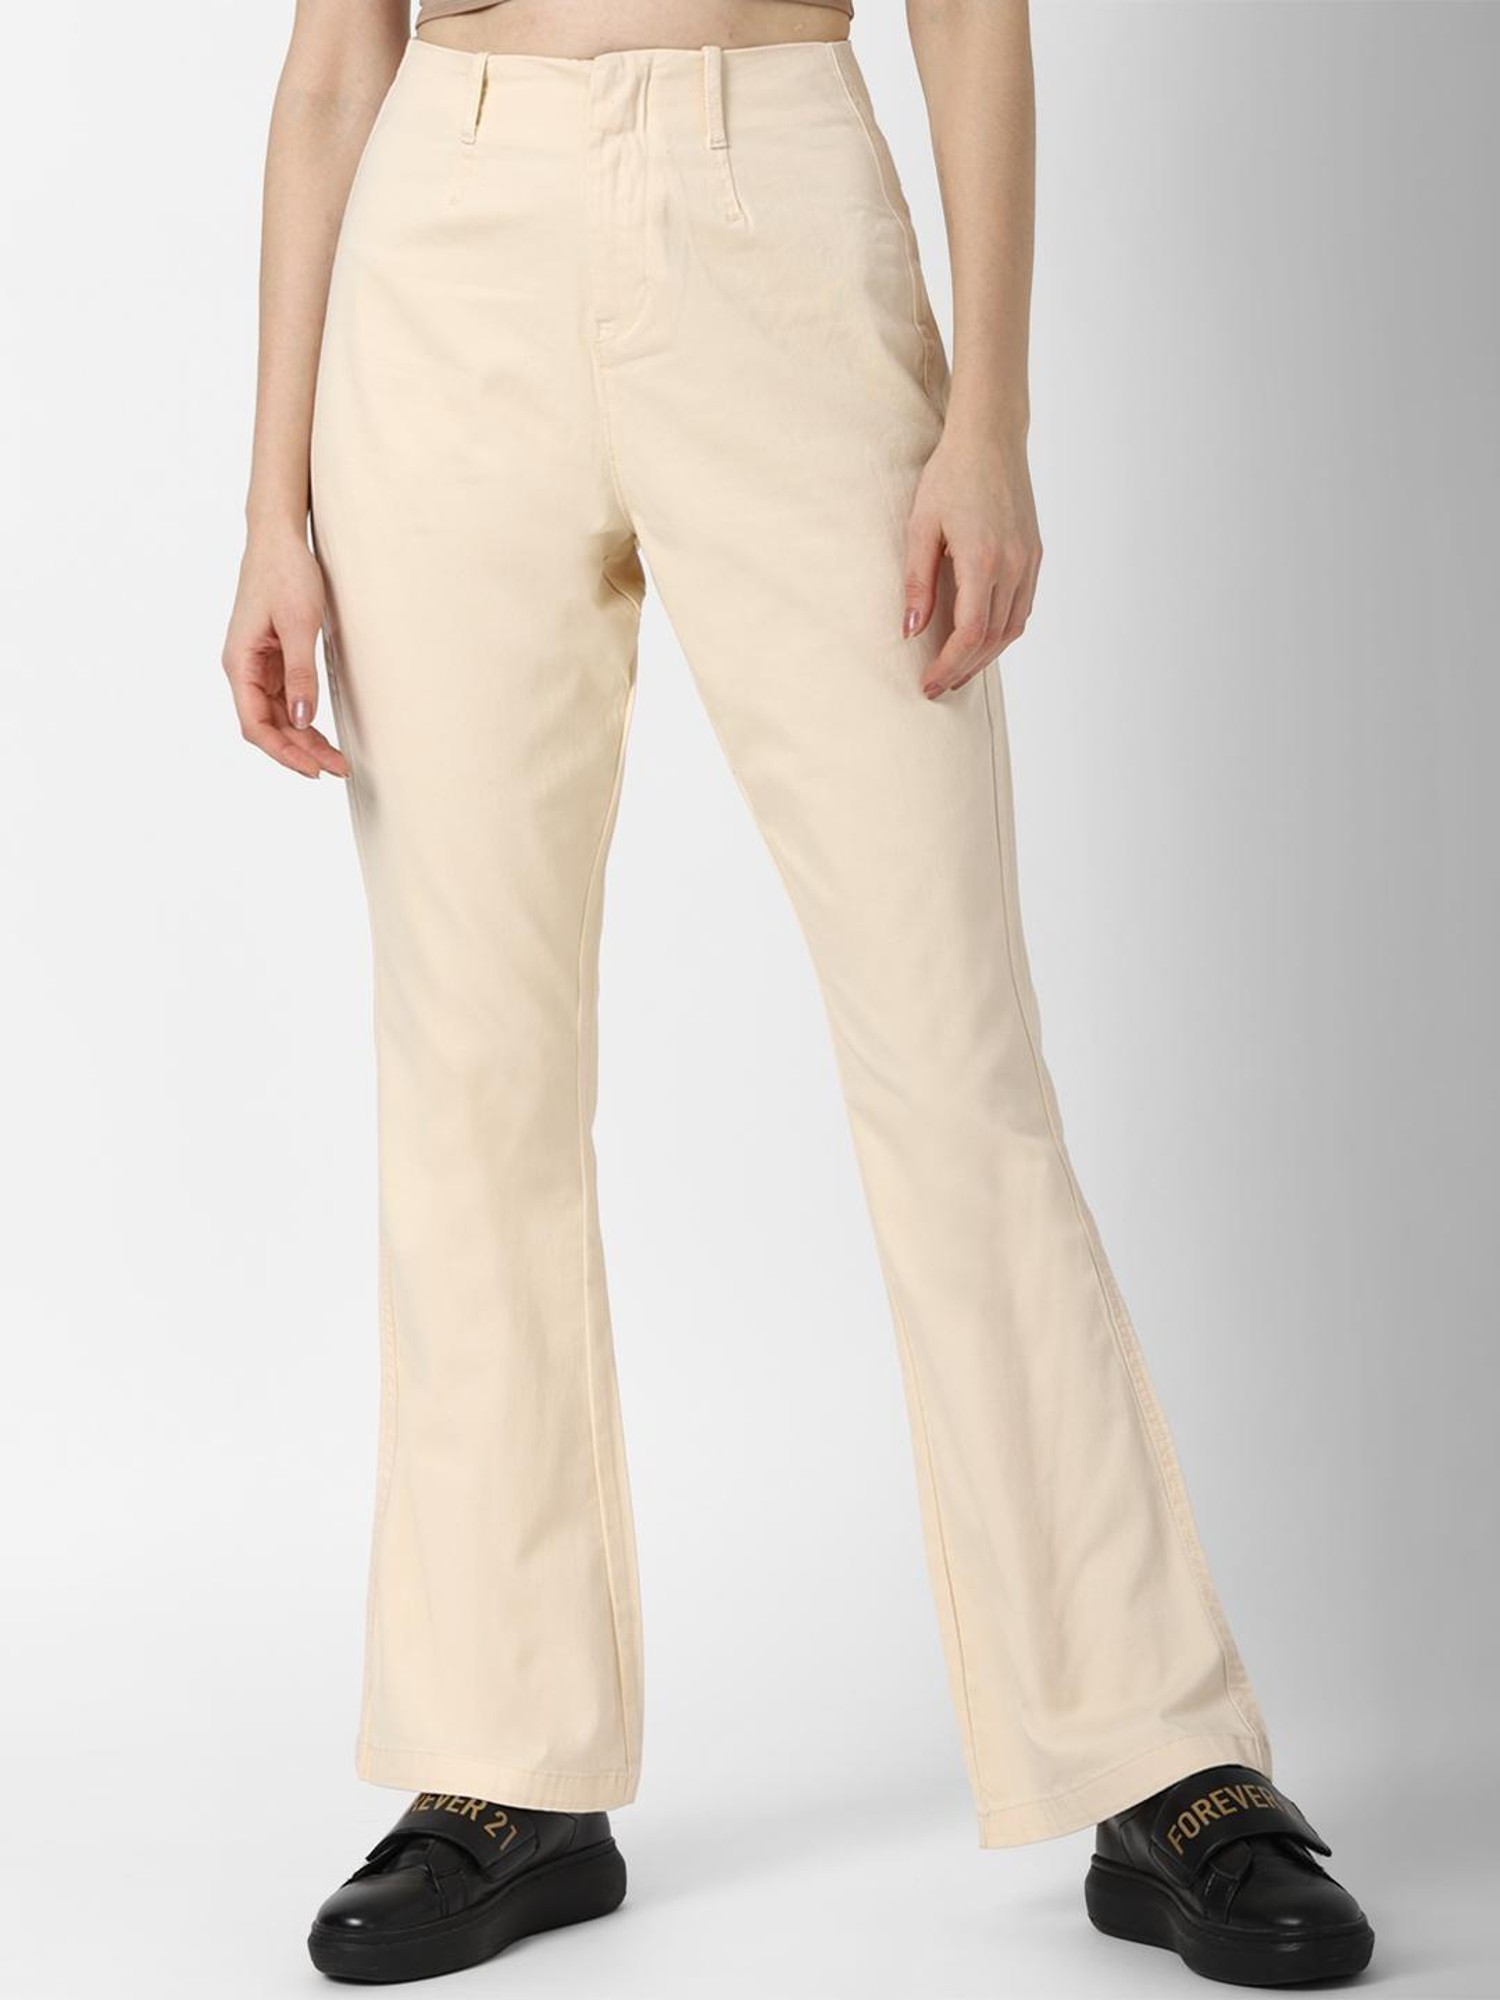 Aggregate 88+ forever 21 trouser pants best - in.cdgdbentre